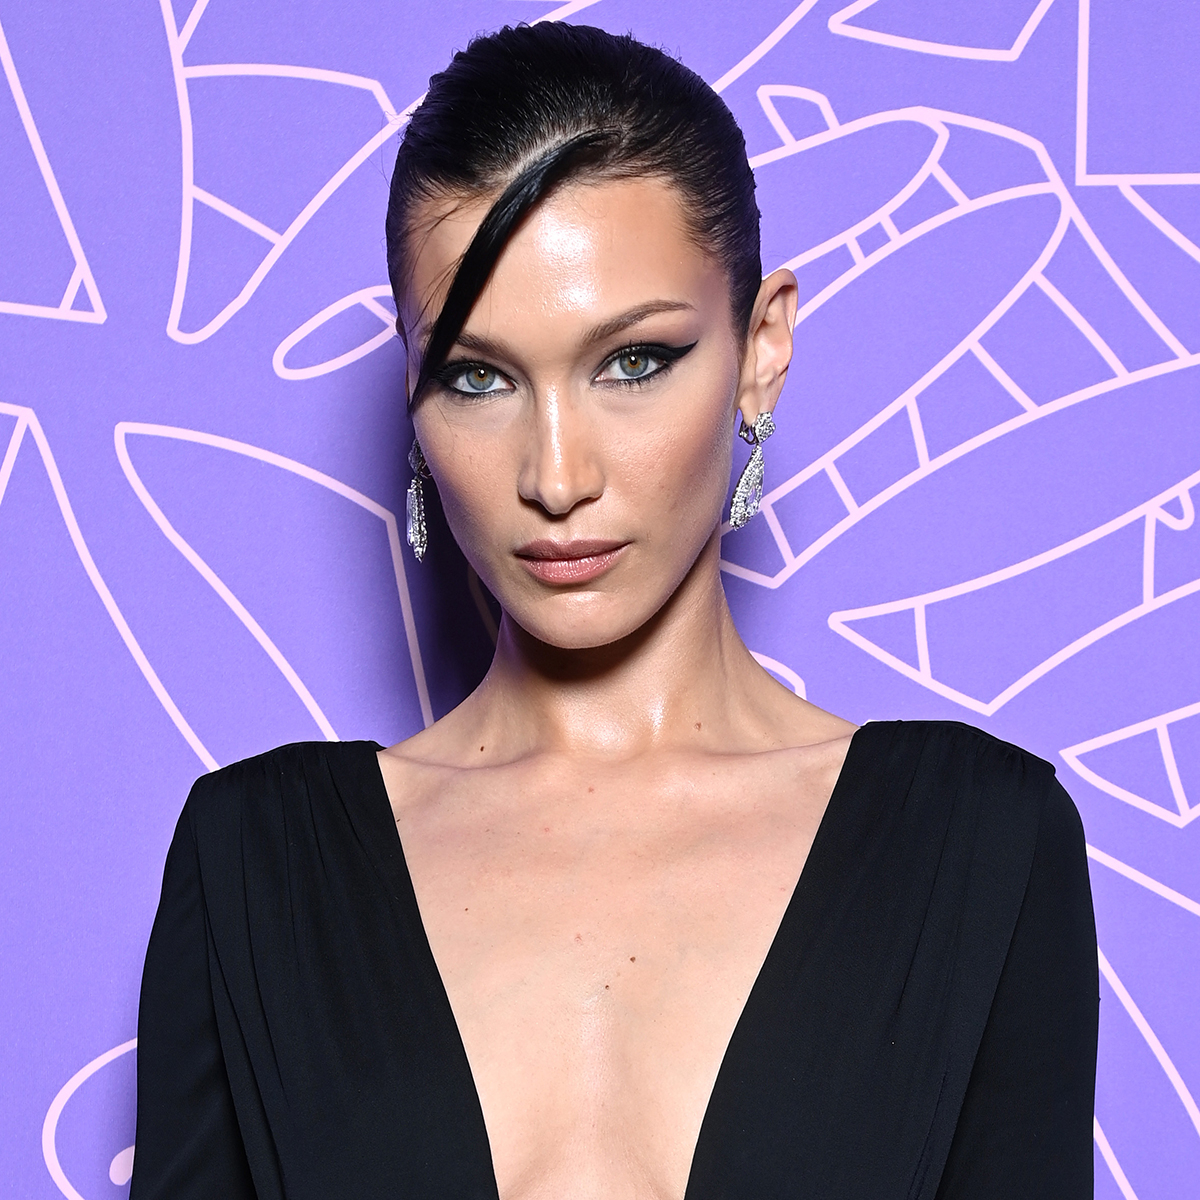 Bella Hadid Gets Real About Her Morning Anxiety